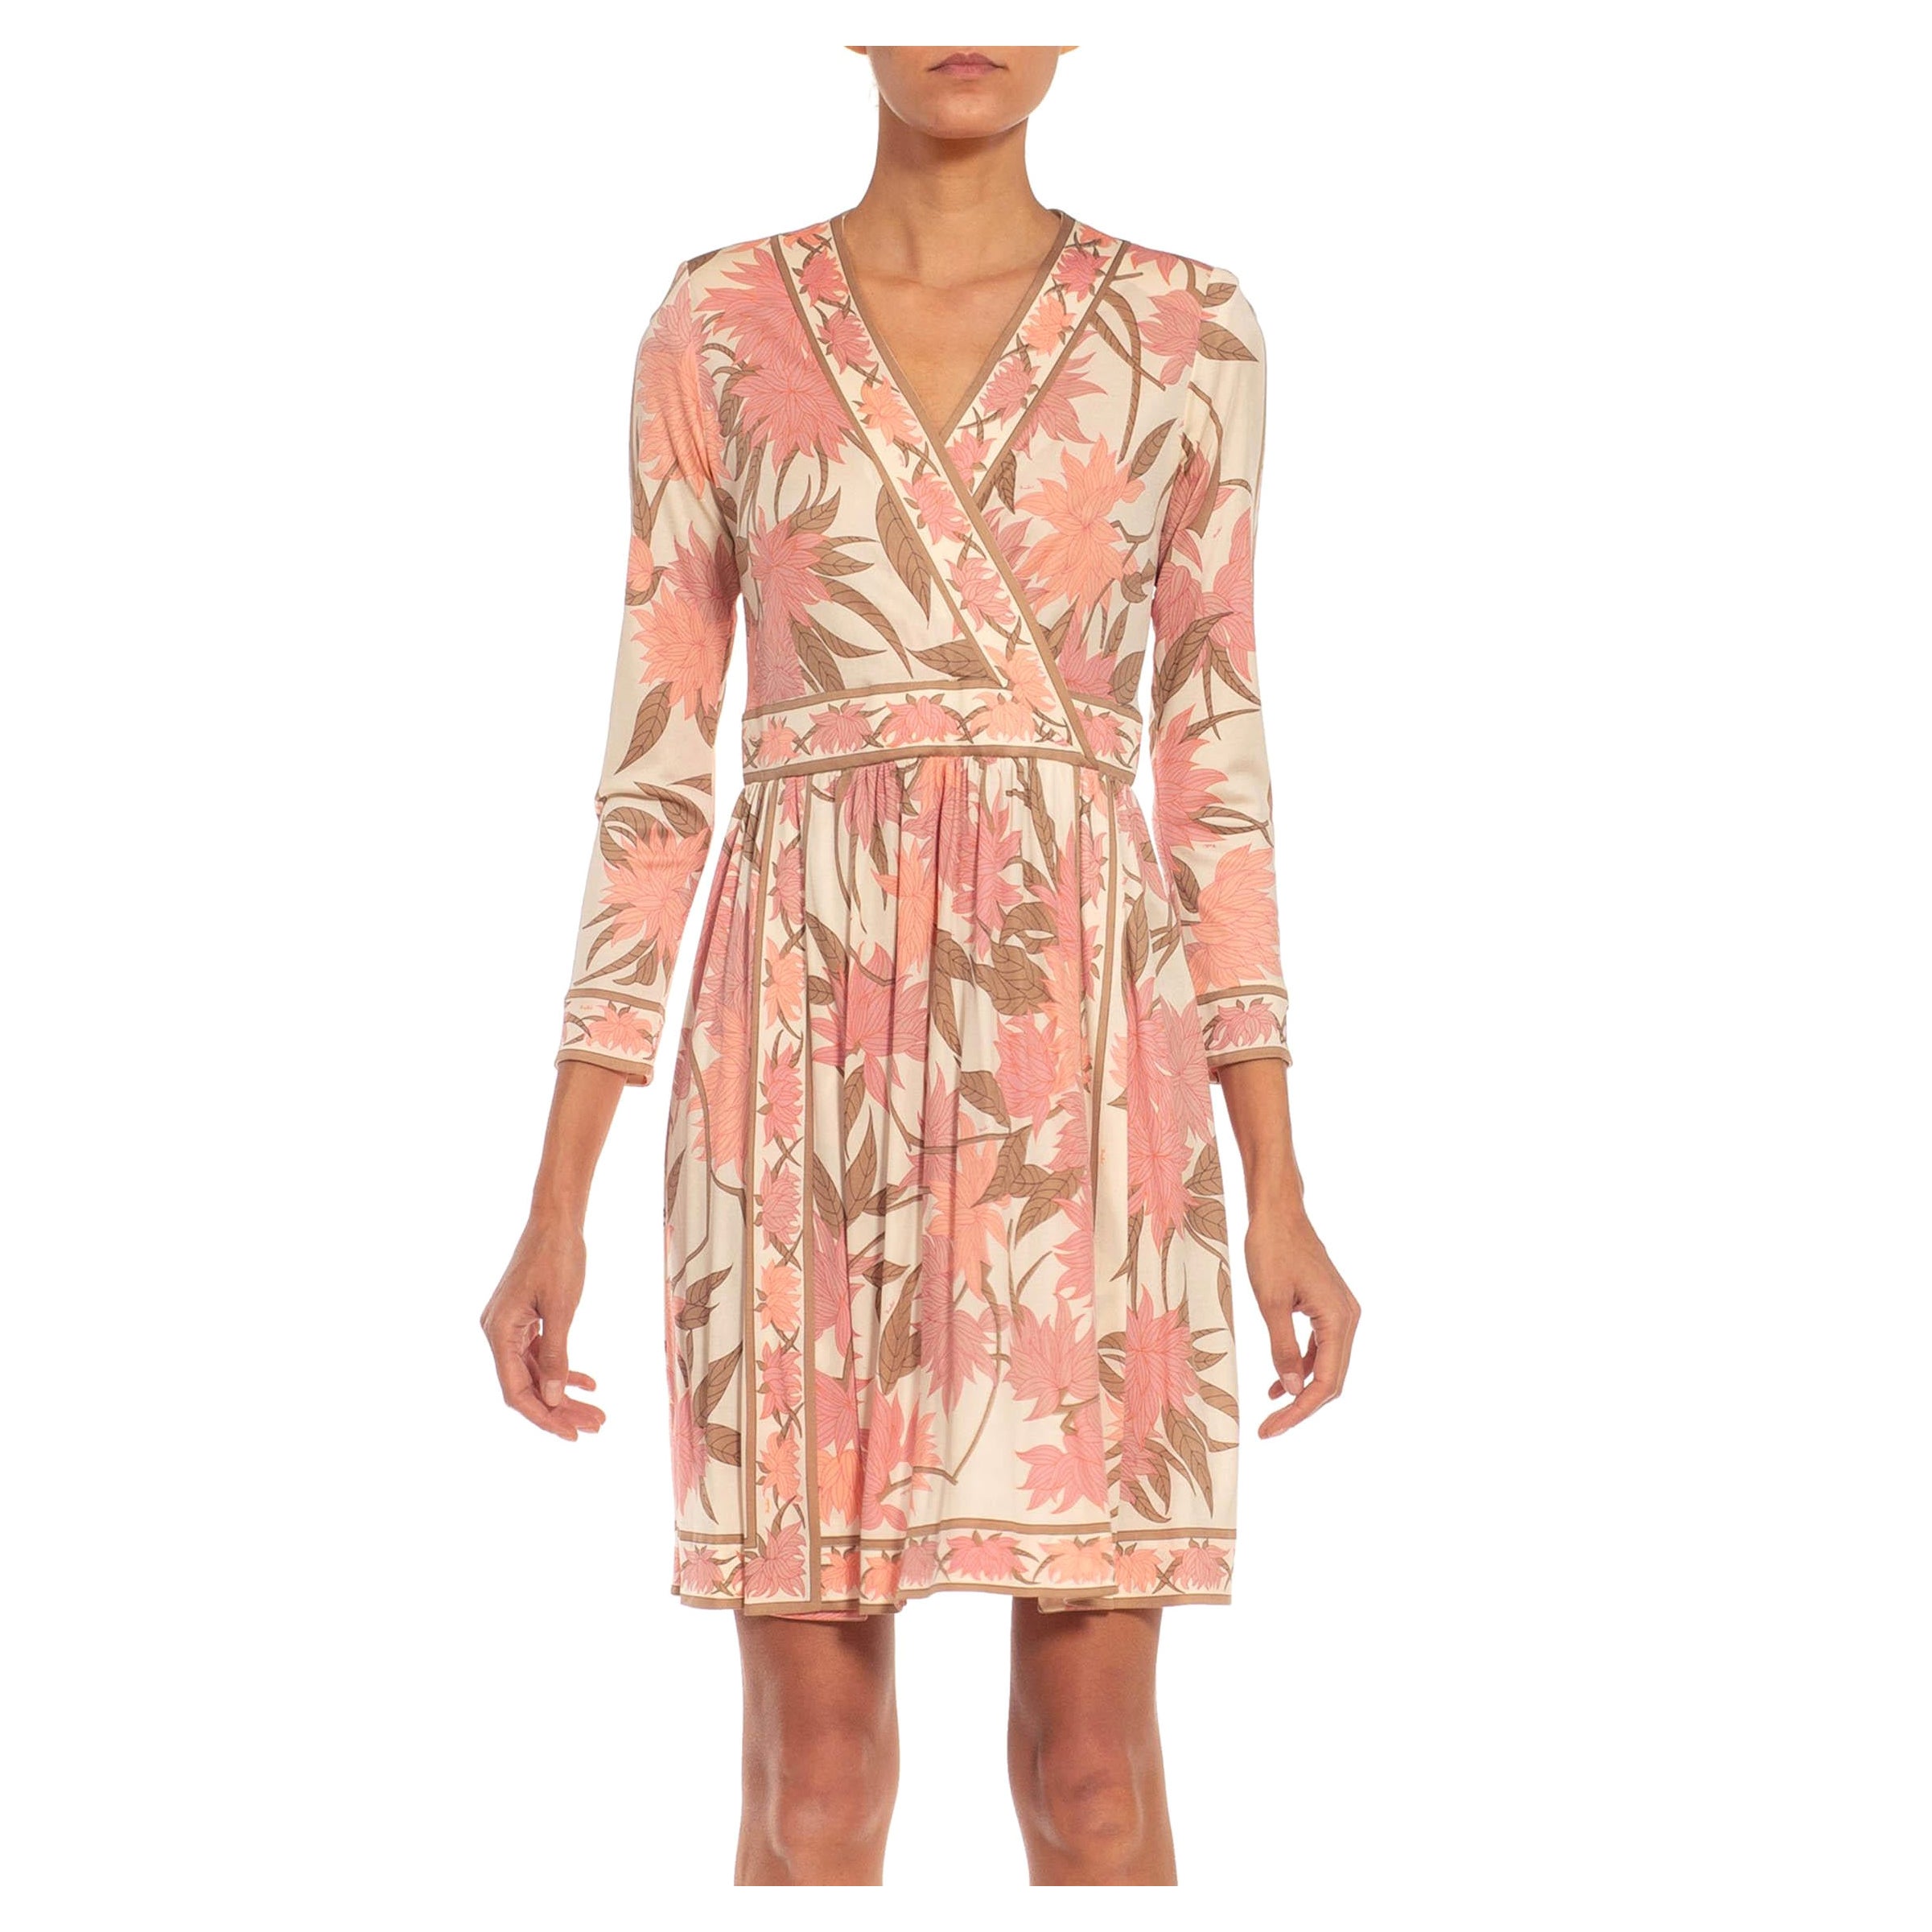 1970S EMILIO PUCCI Cream, Brown & Pink Floral Silk Rayon Blend Signed Dress For Sale